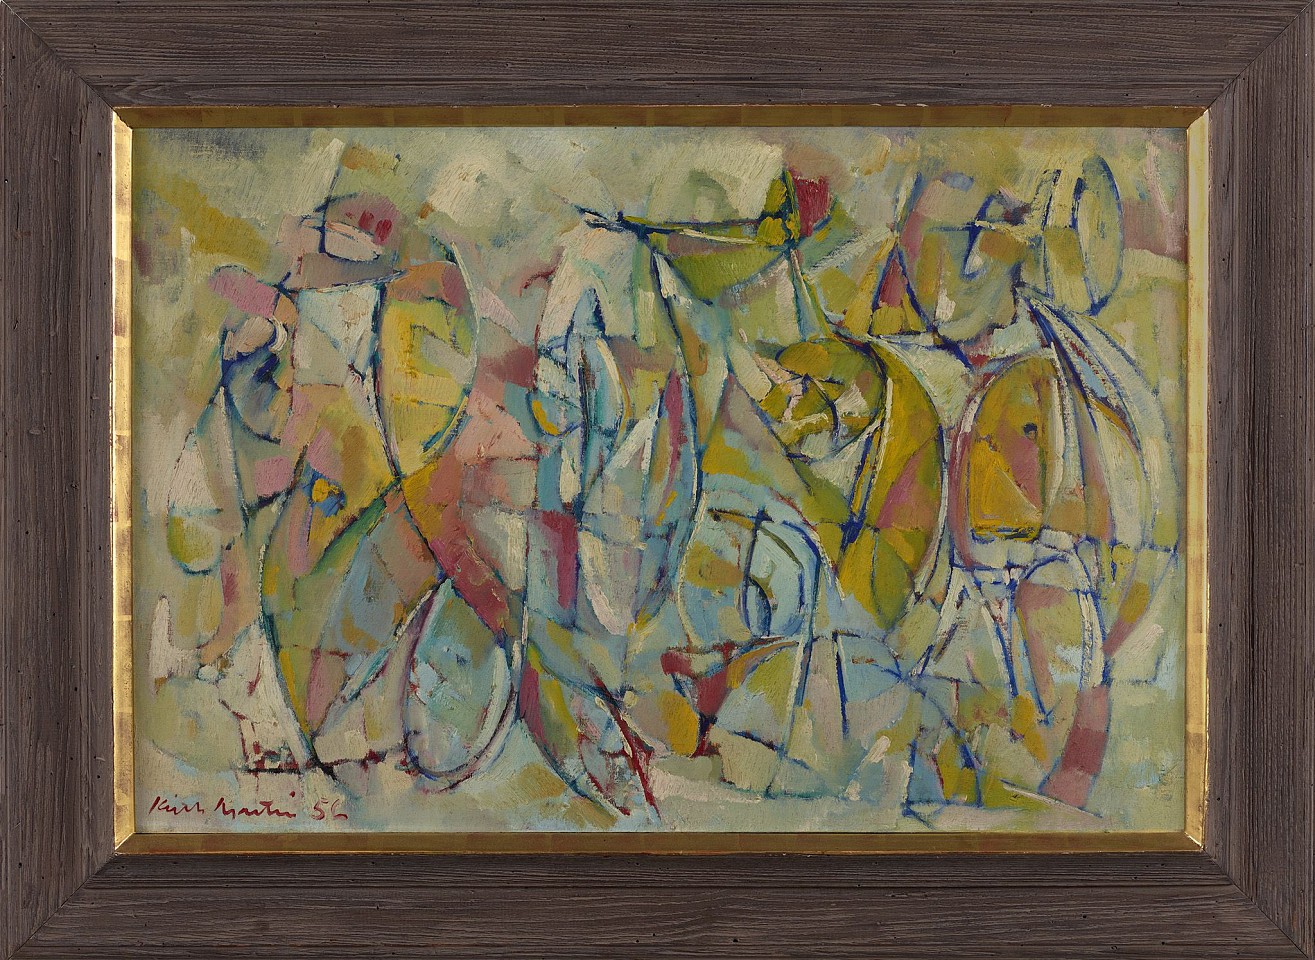 Keith Martin, Harlequinade, 1956
Oil on canvas, 24 x 36 in. (61 x 91.4 cm)
MAR-00001